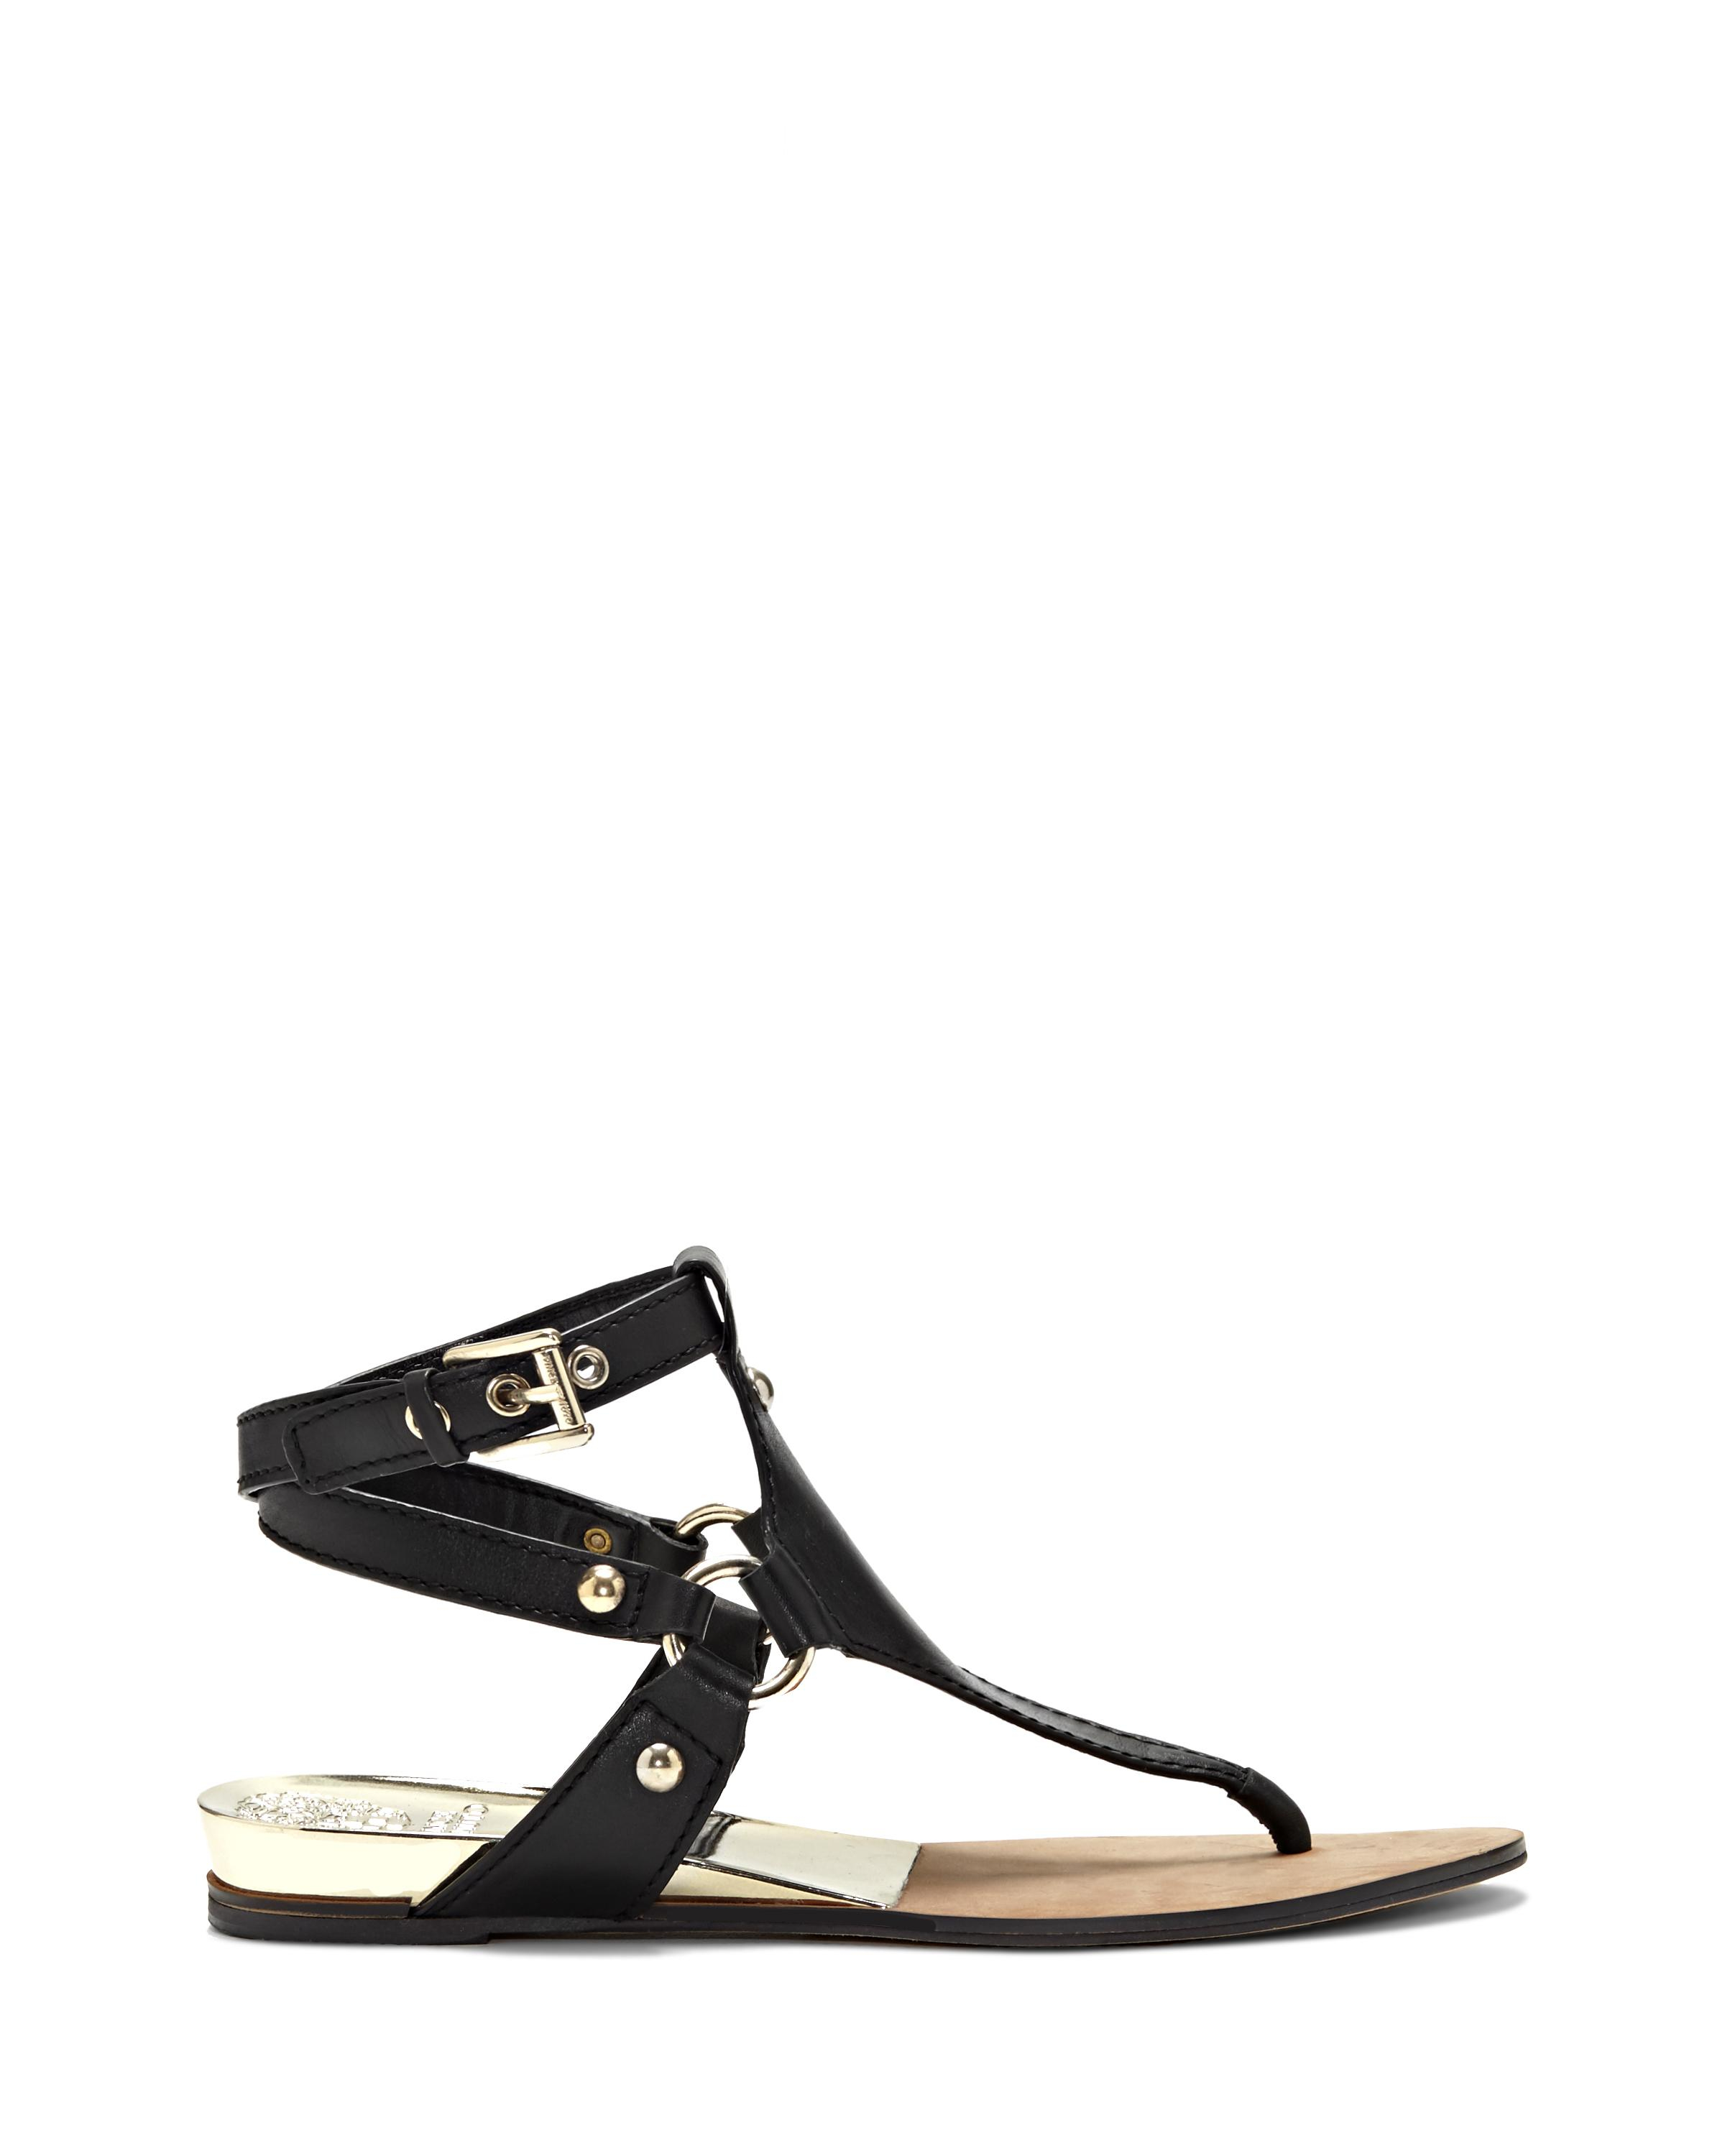 Vince Camuto Leather Adalina - Harness Thong Sandal in Black - Lyst